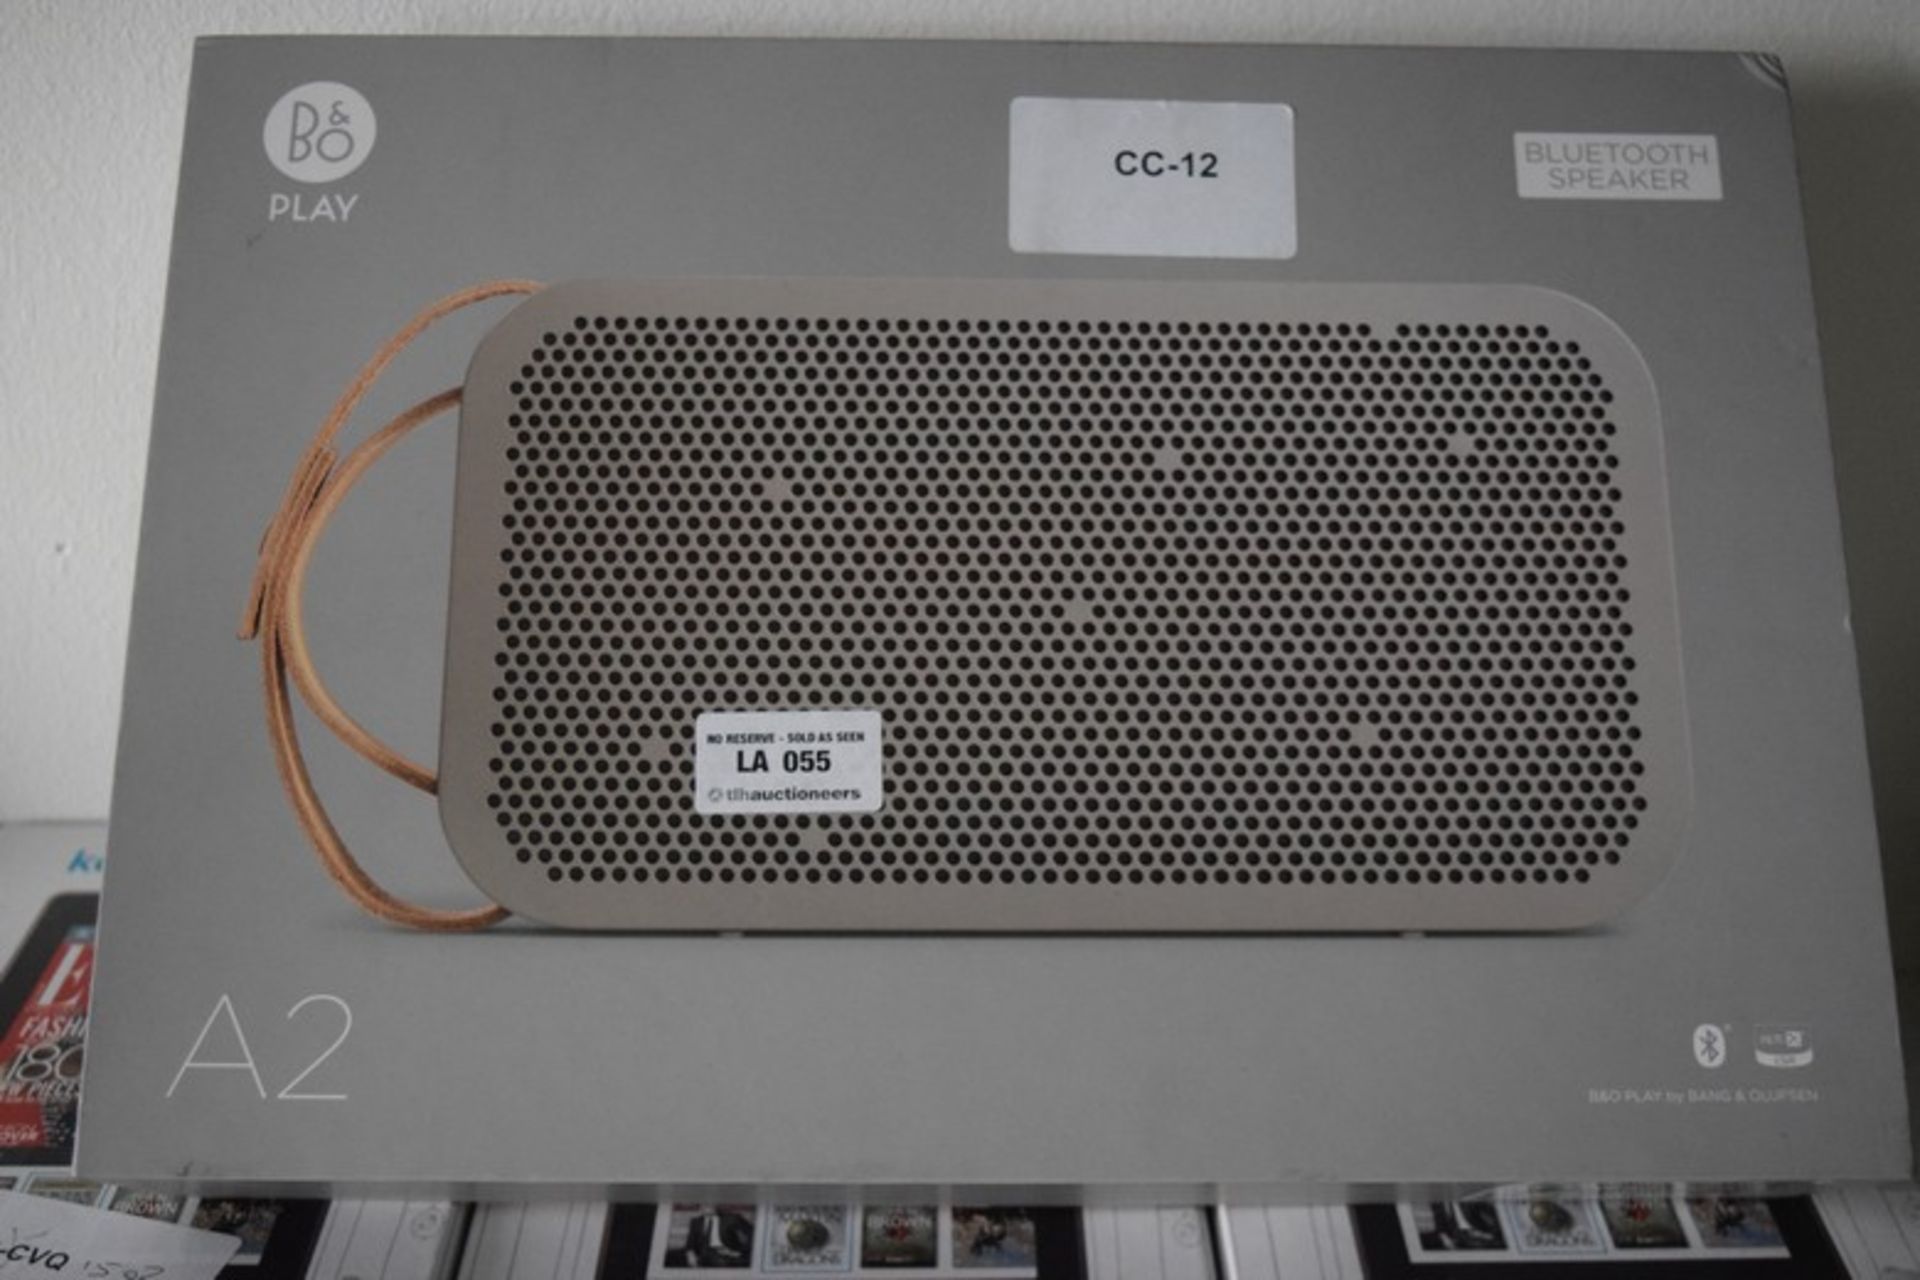 1 x BOXED BANG & OLUFSEN A2 BLUETOOTH SPEAKER RRP £300 *PLEASE NOTE THAT THE BID PRICE IS MULTIPLIED